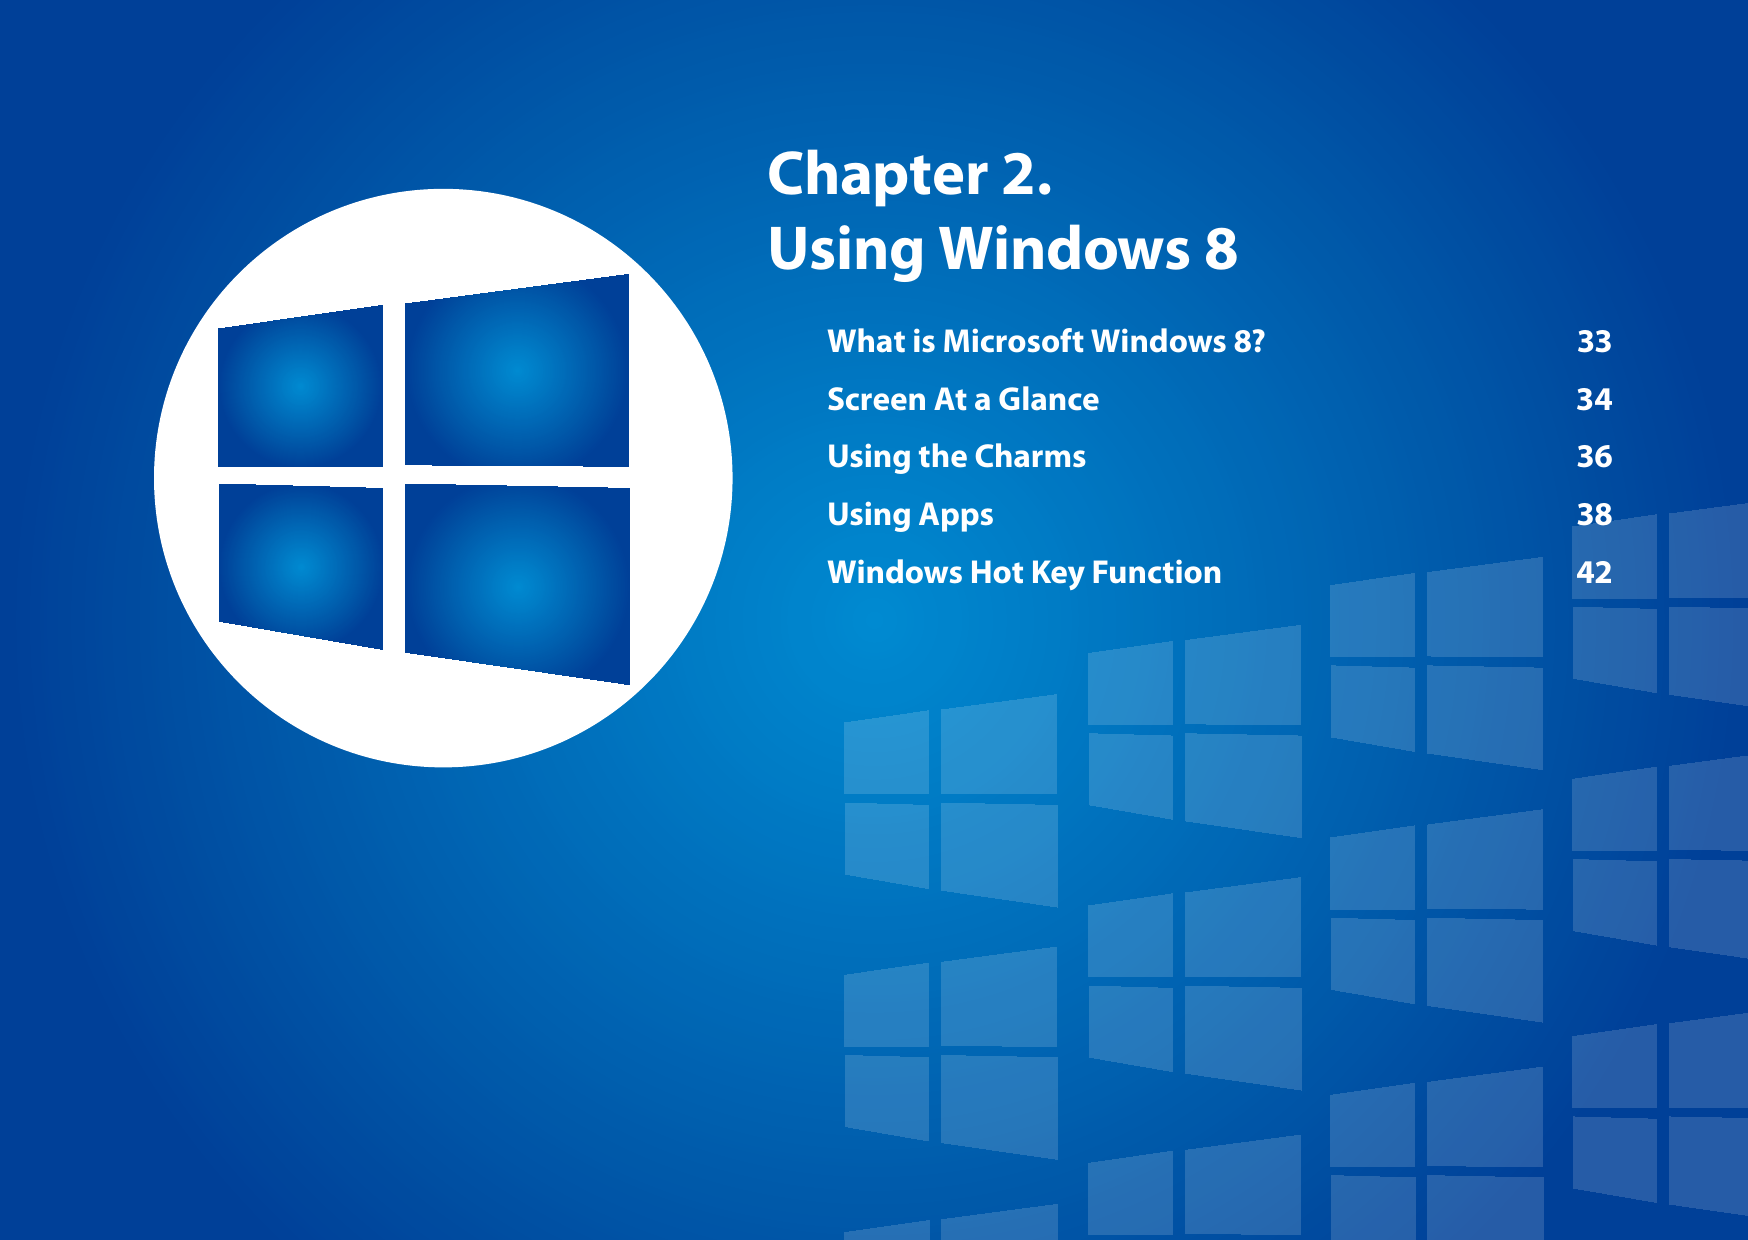 Chapter 2. Using Windows 8What is Microsoft Windows 8?  33Screen At a Glance  34Using the Charms  36Using Apps  38Windows Hot Key Function  42